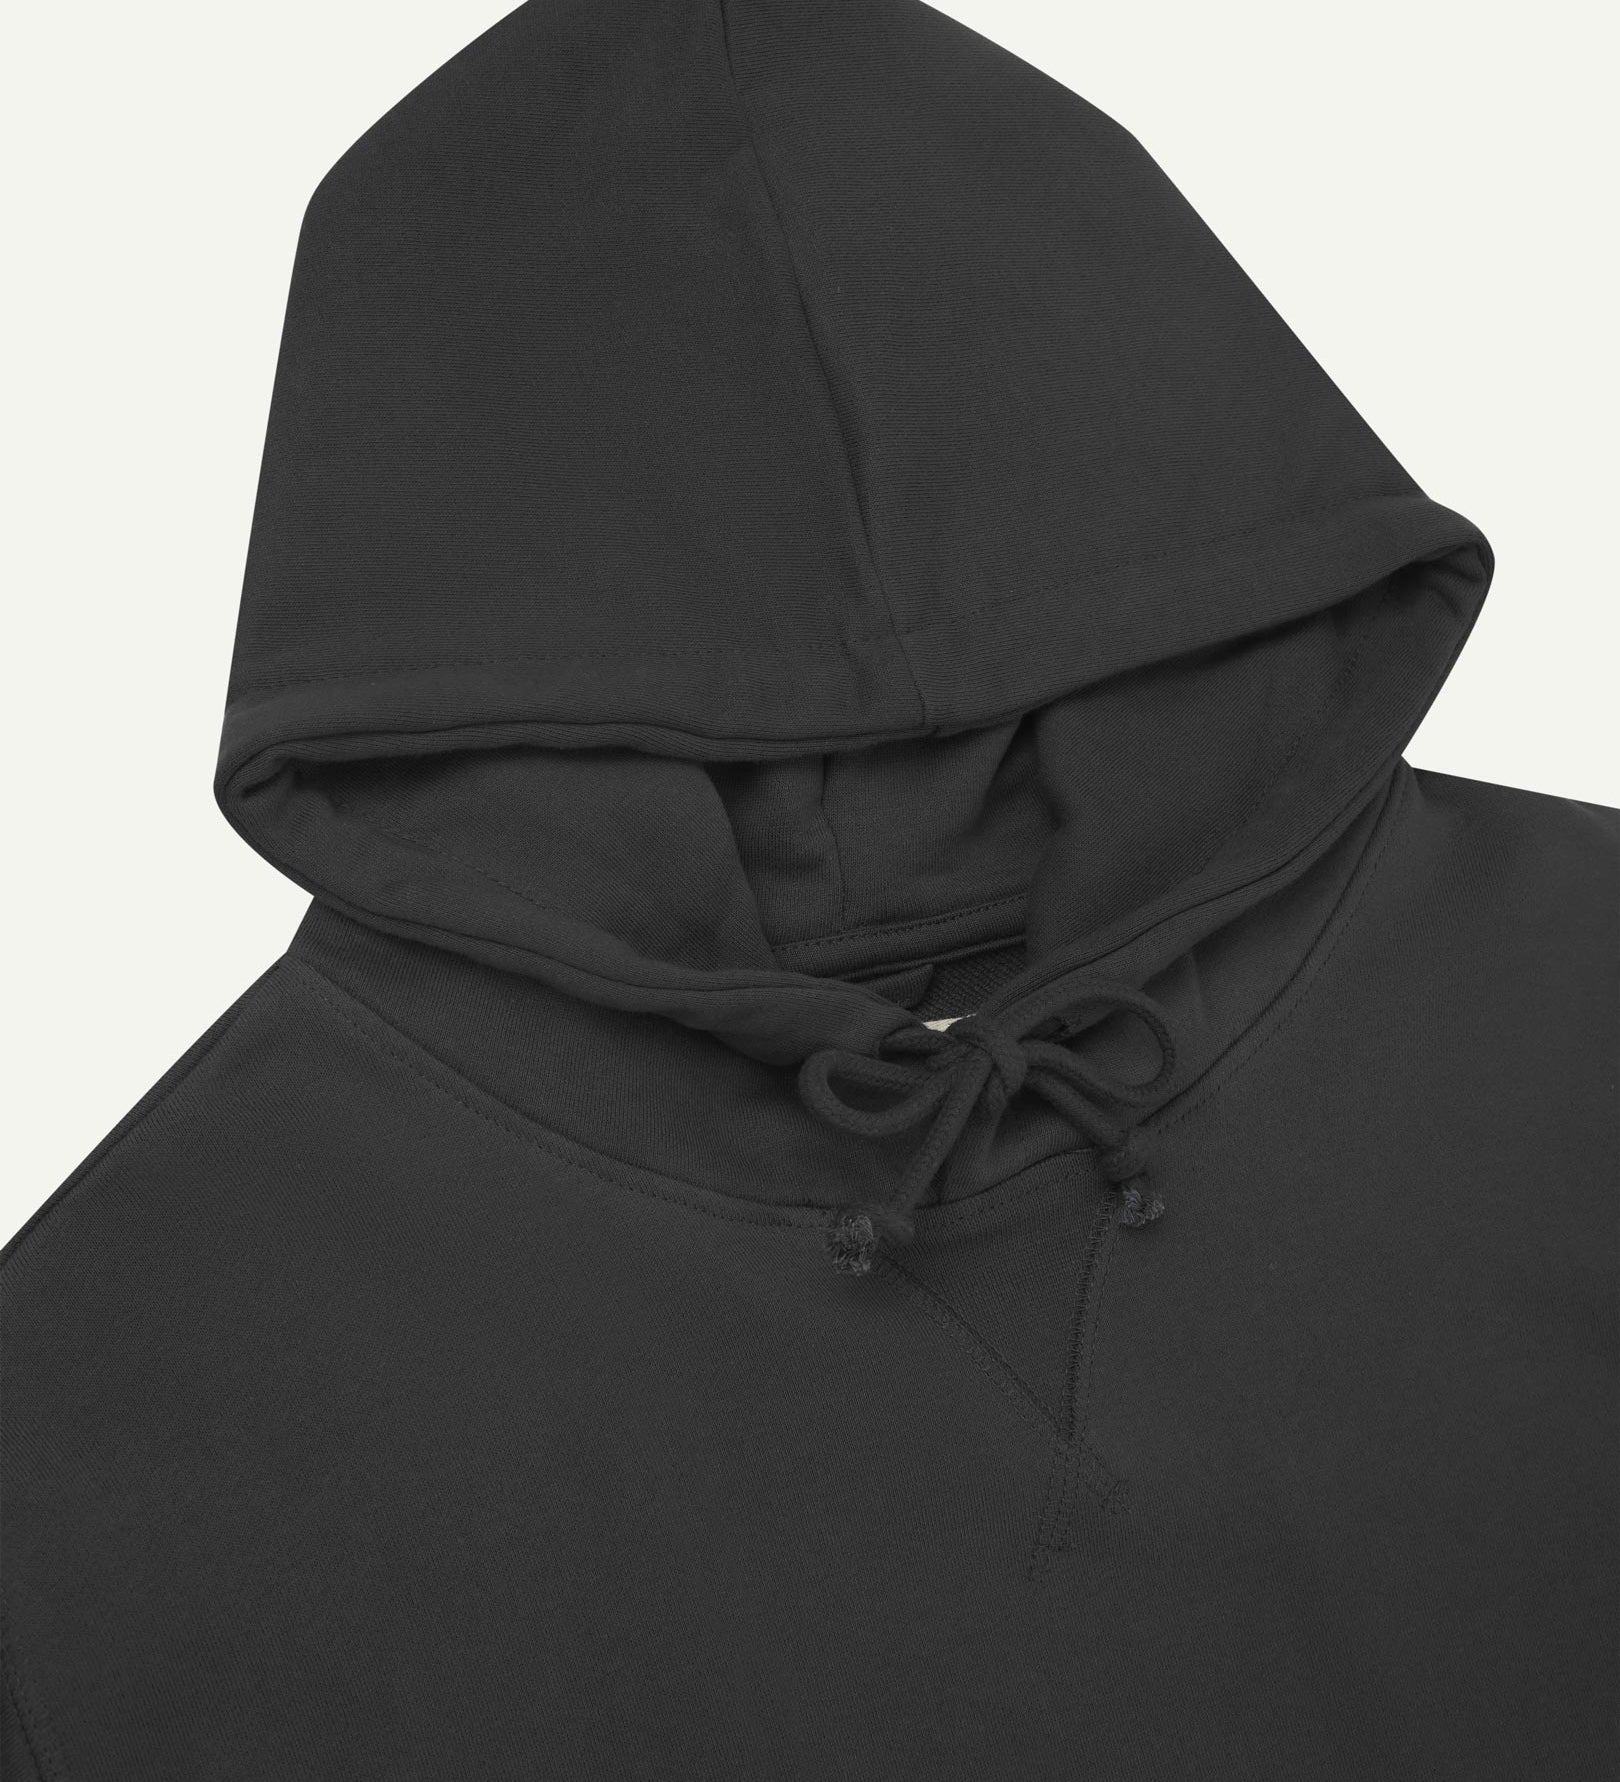 Front close-up view of Uskees 7004 faded black hoodie showing hood tie detail at neck and decorative V pattern.